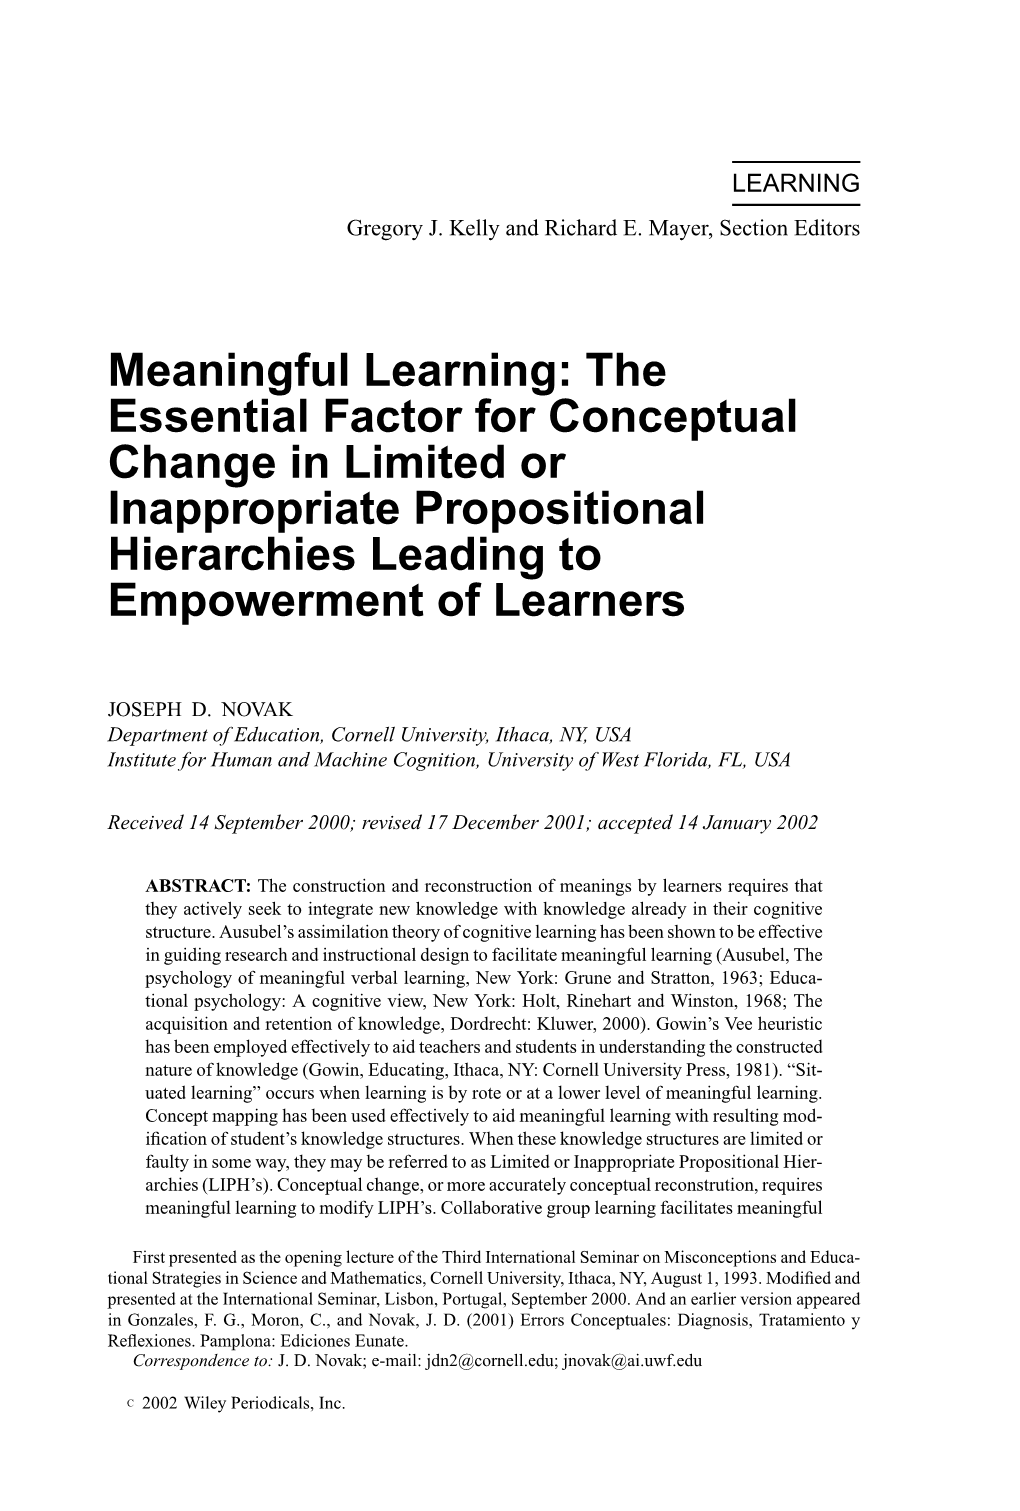 Meaningful Learning: the Essential Factor for Conceptual Change in Limited Or Inappropriate Propositional Hierarchies Leading to Empowerment of Learners